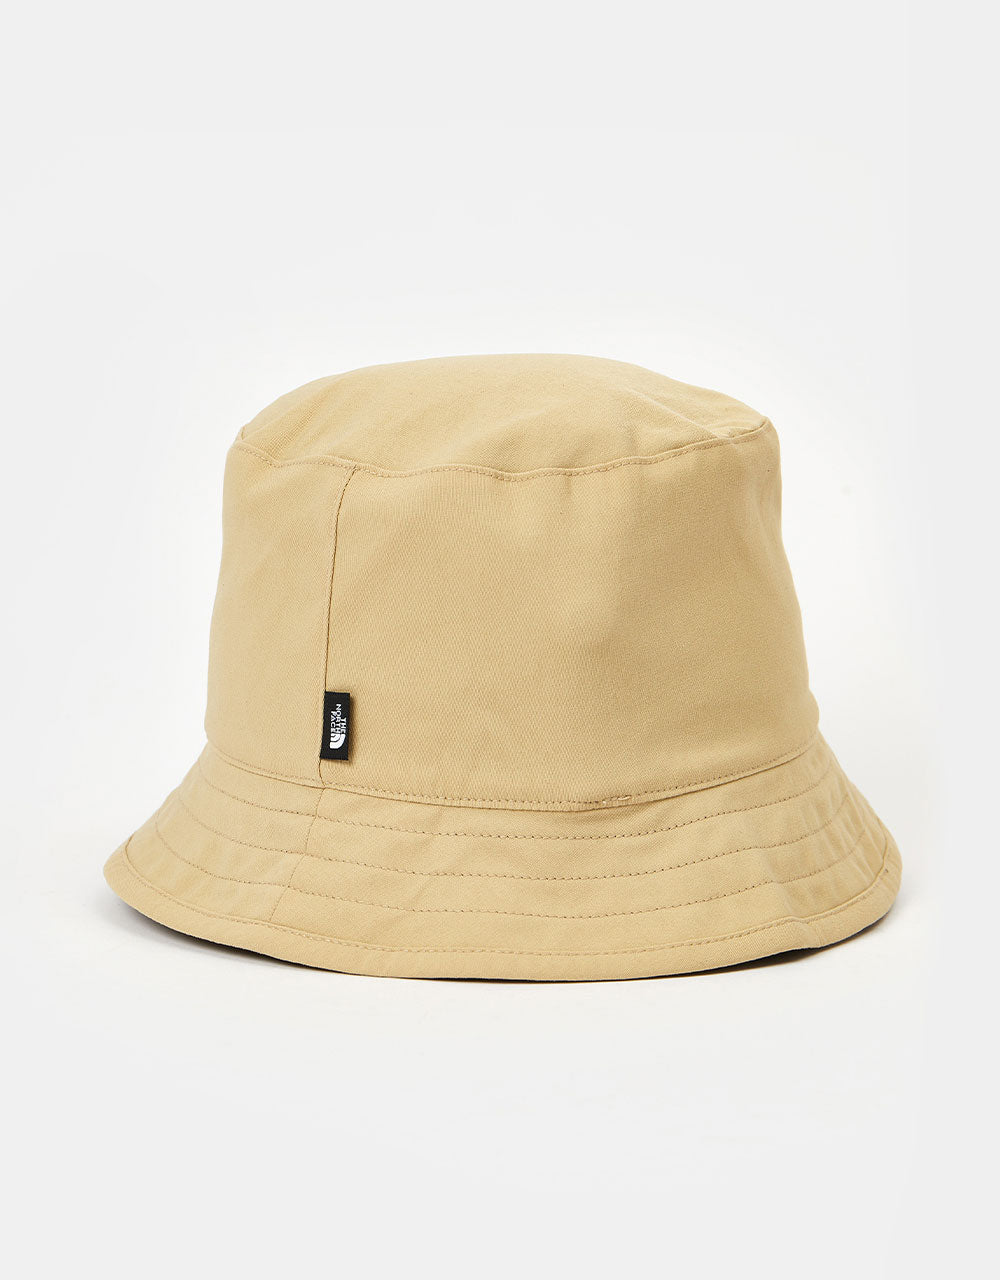 The North Face Class V Reversible Bucket Hat - New Taupe Green-Khaki Stone